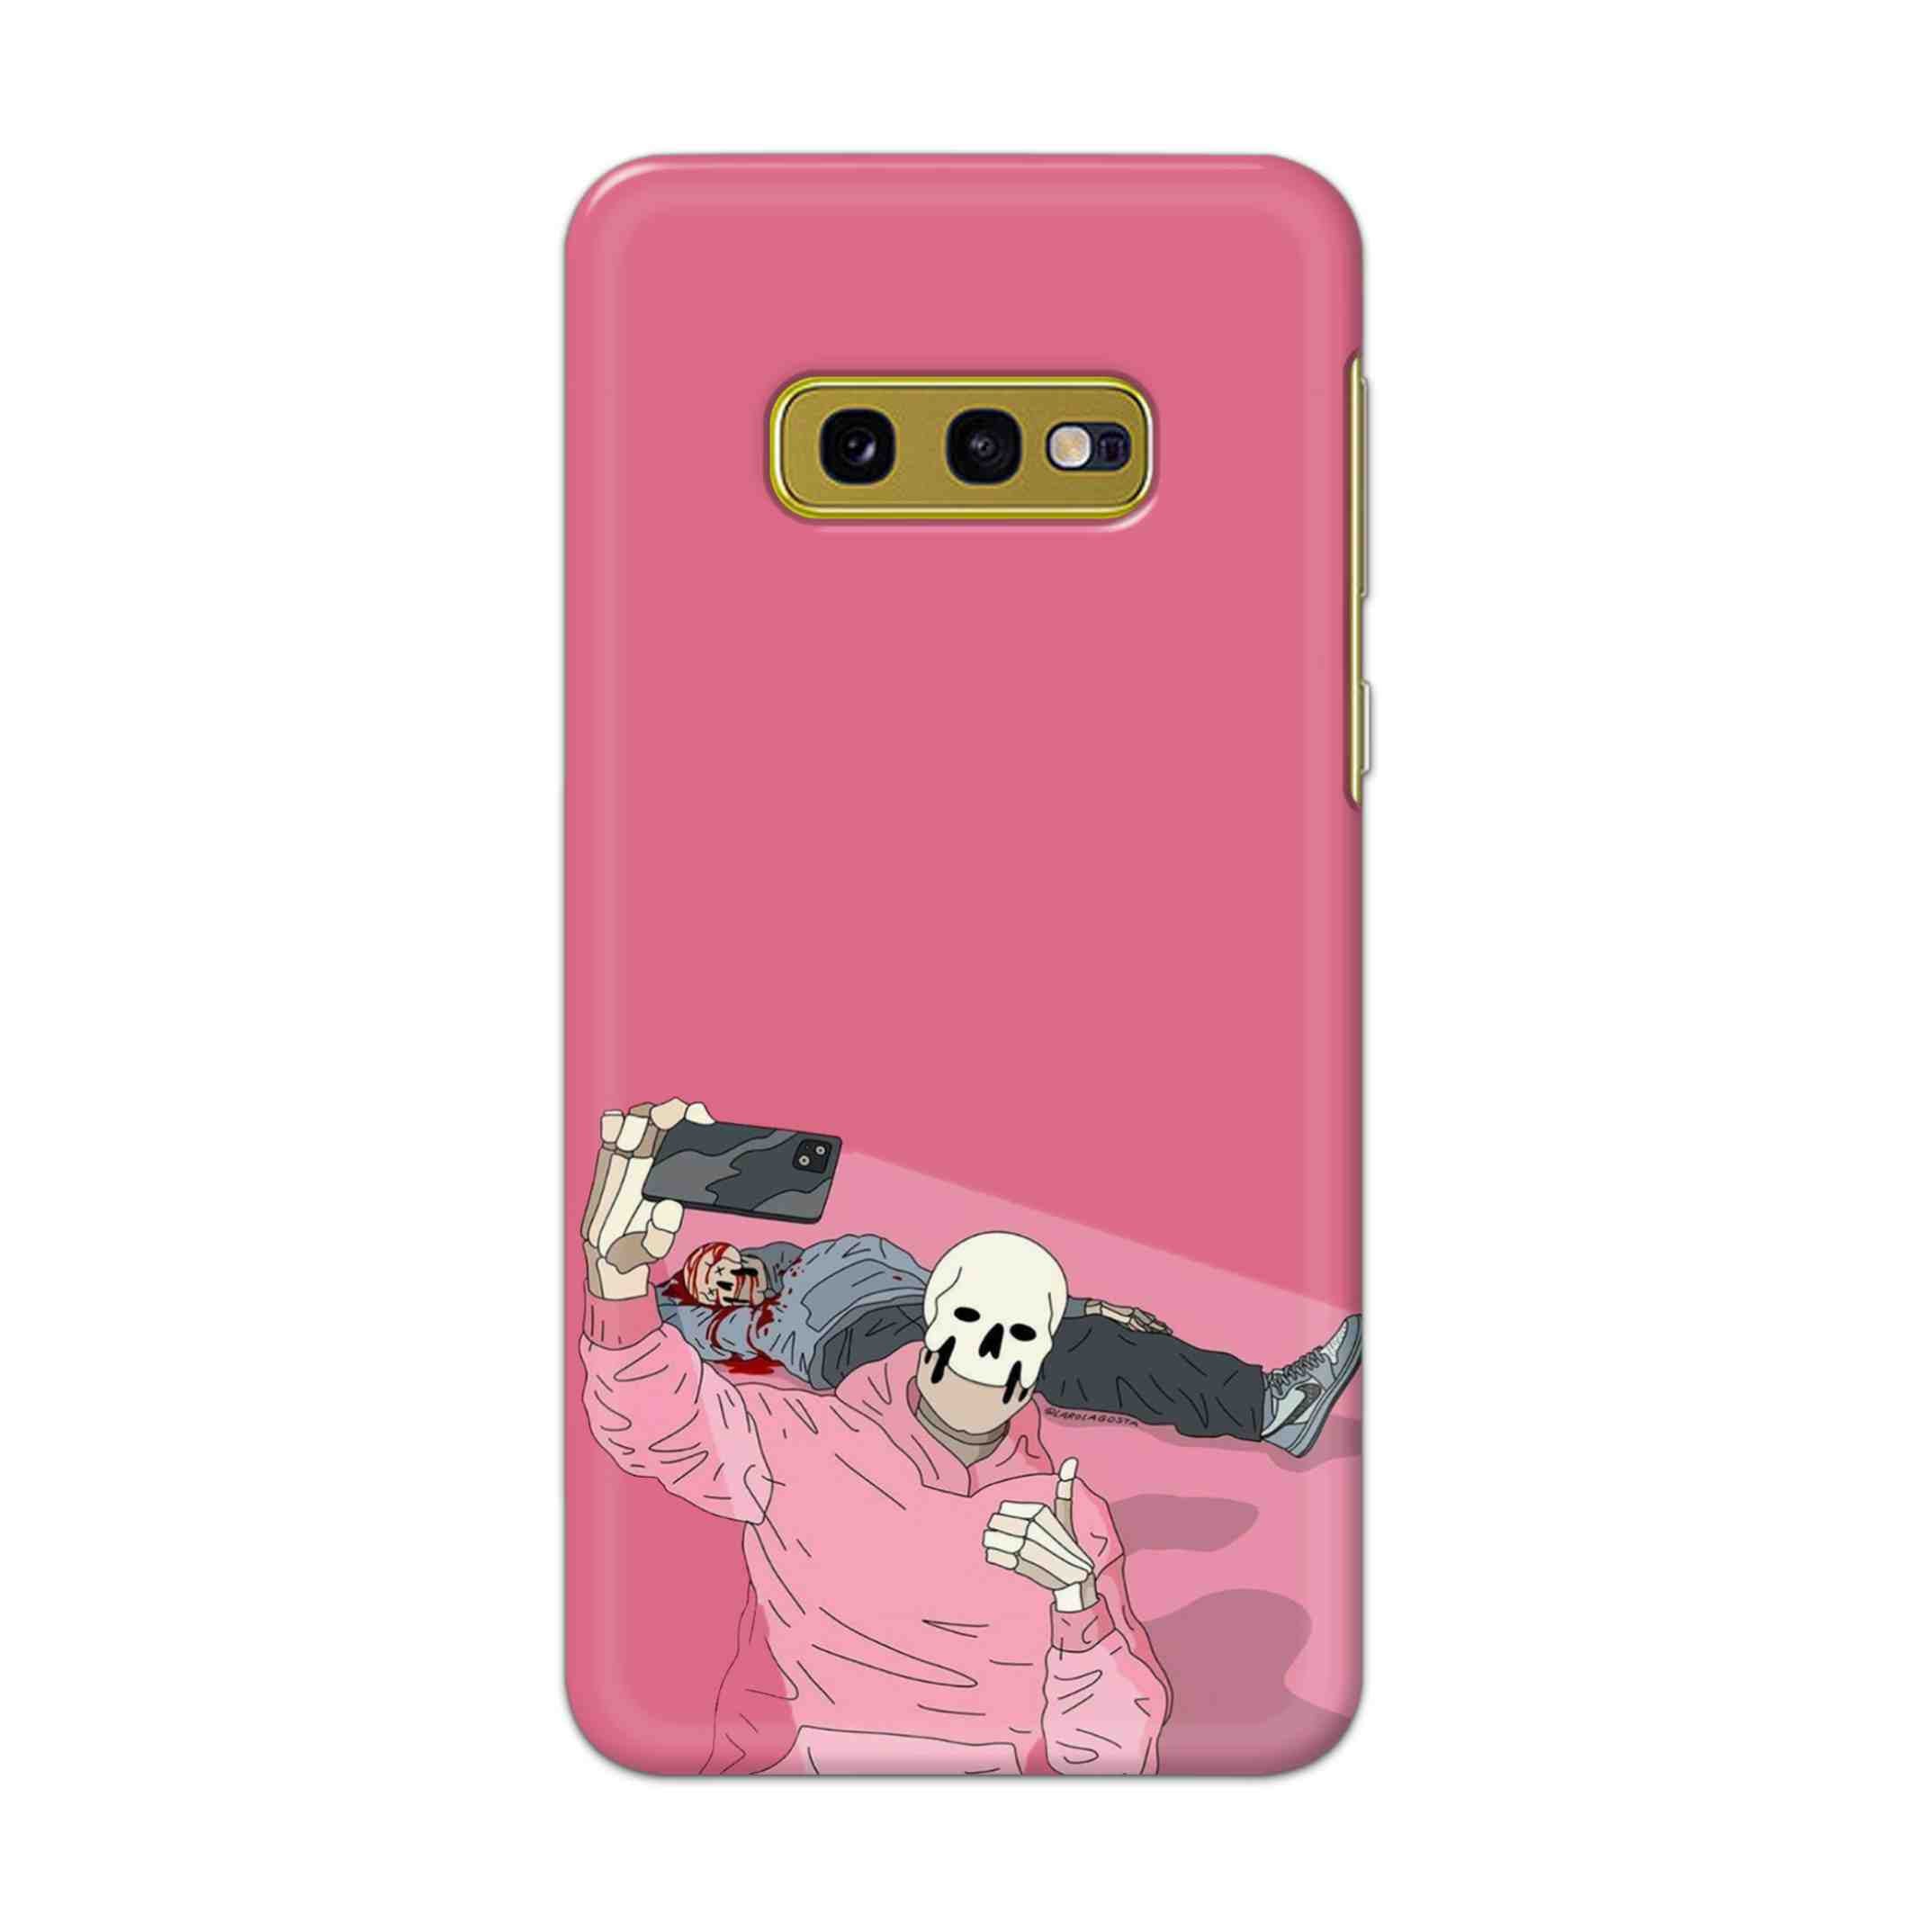 Buy Selfie Hard Back Mobile Phone Case Cover For Samsung Galaxy S10e Online